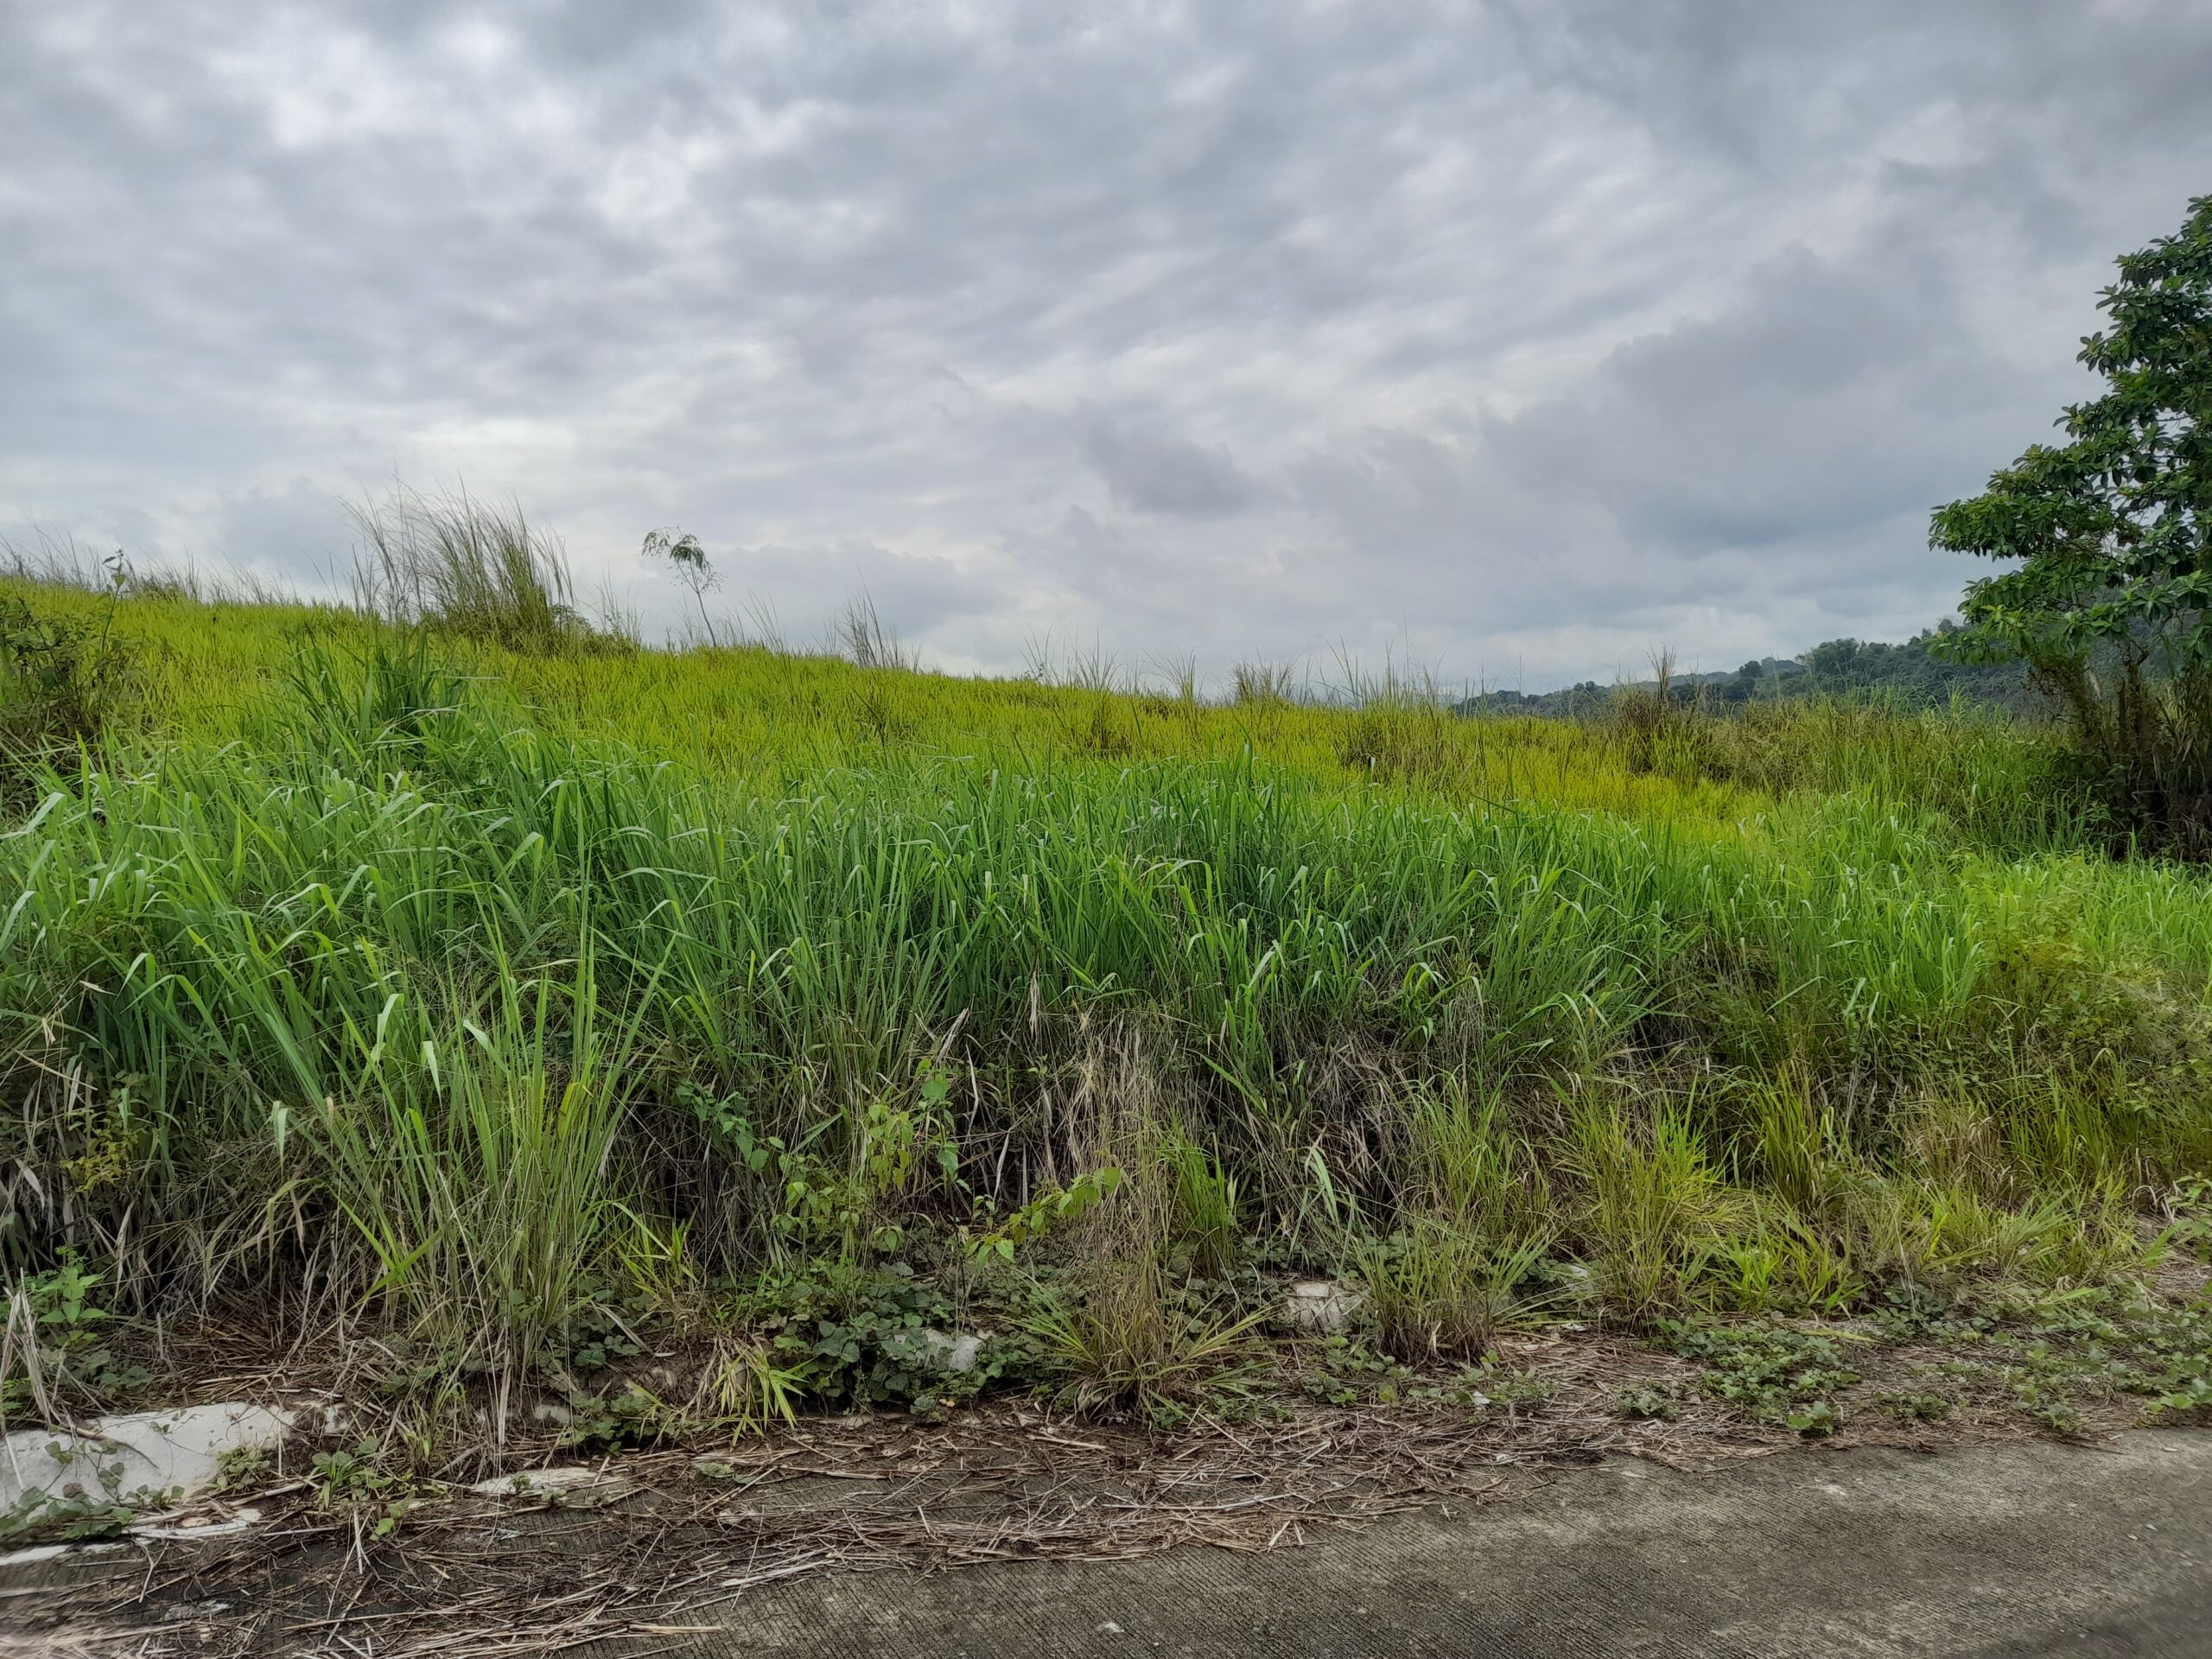 For Sale: 556sqm. Vacant Lot Eastland Heights Subdivision in Antipolo, Rizal